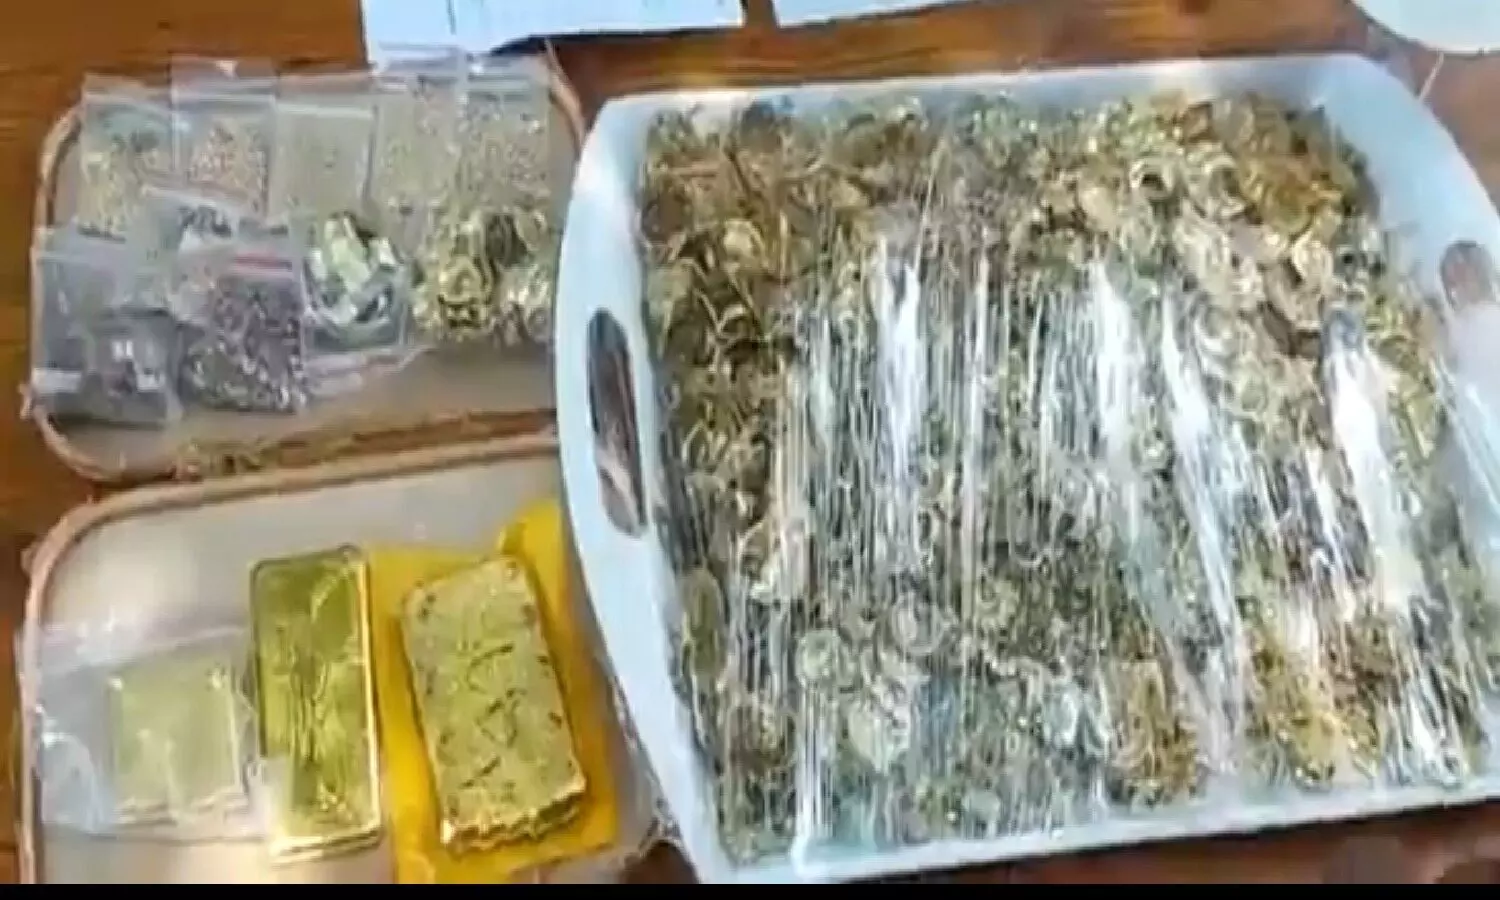 Chandauli district has arrested two accused along with recovering huge amount of illegal gold during checking